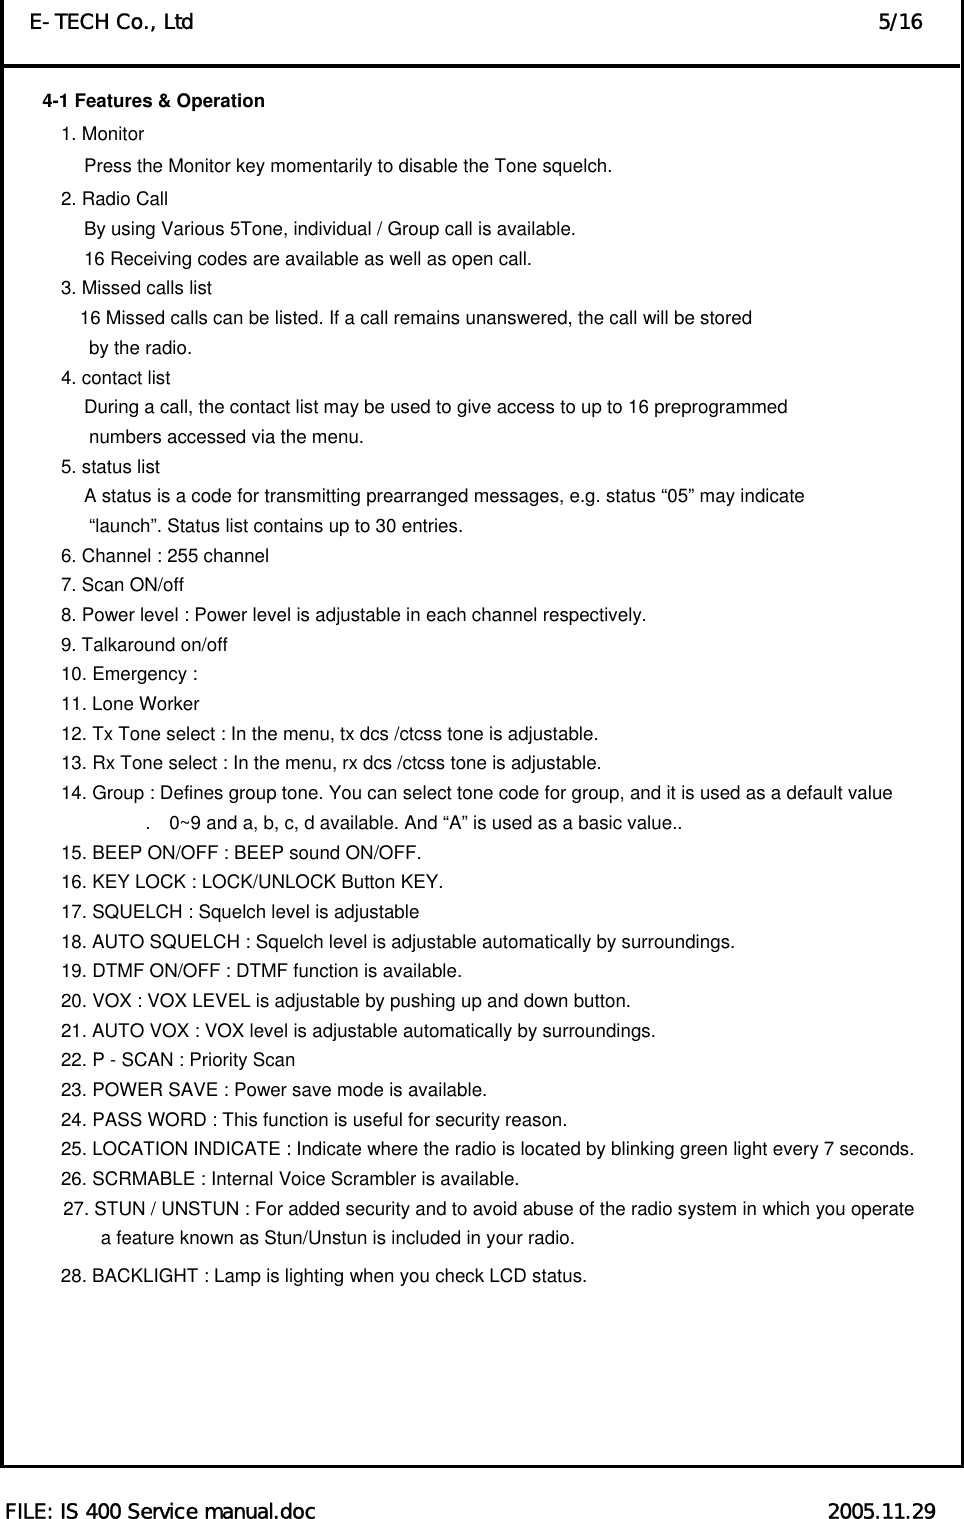  FILE: IS 400 Service manual.doc                                                  2005.11.29 E-TECH Co., Ltd                                                                   5/16 4-1 Features &amp; Operation         1. Monitor                  Press the Monitor key momentarily to disable the Tone squelch.   2. Radio Call                   By using Various 5Tone, individual / Group call is available.                   16 Receiving codes are available as well as open call. 3. Missed calls list                  16 Missed calls can be listed. If a call remains unanswered, the call will be stored by the radio.   4. contact list                   During a call, the contact list may be used to give access to up to 16 preprogrammed   numbers accessed via the menu.   5. status list                   A status is a code for transmitting prearranged messages, e.g. status “05” may indicate “launch”. Status list contains up to 30 entries. 6. Channel : 255 channel   7. Scan ON/off   8. Power level : Power level is adjustable in each channel respectively.   9. Talkaround on/off   10. Emergency :   11. Lone Worker   12. Tx Tone select : In the menu, tx dcs /ctcss tone is adjustable.   13. Rx Tone select : In the menu, rx dcs /ctcss tone is adjustable.   14. Group : Defines group tone. You can select tone code for group, and it is used as a default value .    0~9 and a, b, c, d available. And “A” is used as a basic value..   15. BEEP ON/OFF : BEEP sound ON/OFF.     16. KEY LOCK : LOCK/UNLOCK Button KEY.   17. SQUELCH : Squelch level is adjustable   18. AUTO SQUELCH : Squelch level is adjustable automatically by surroundings.   19. DTMF ON/OFF : DTMF function is available.   20. VOX : VOX LEVEL is adjustable by pushing up and down button.   21. AUTO VOX : VOX level is adjustable automatically by surroundings.   22. P - SCAN : Priority Scan   23. POWER SAVE : Power save mode is available.   24. PASS WORD : This function is useful for security reason.   25. LOCATION INDICATE : Indicate where the radio is located by blinking green light every 7 seconds.   26. SCRMABLE : Internal Voice Scrambler is available.   27. STUN / UNSTUN : For added security and to avoid abuse of the radio system in which you operate     a feature known as Stun/Unstun is included in your radio. 28. BACKLIGHT : Lamp is lighting when you check LCD status.          